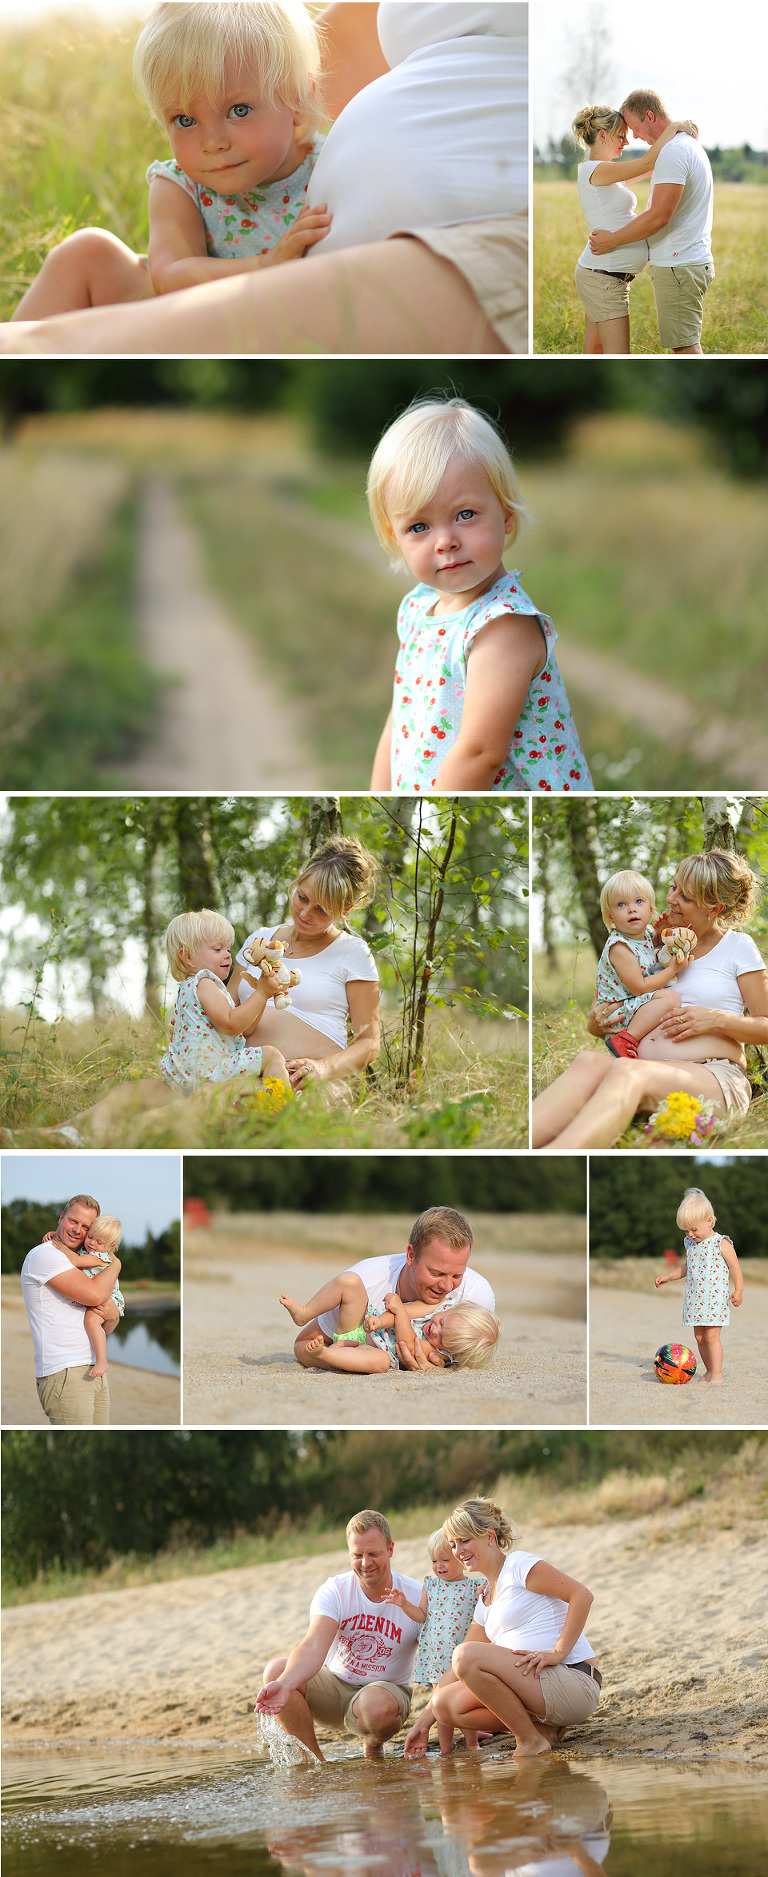 Shooting_Familie_Kind_Babybauch_Dominic_Schulz_Outdoor_2